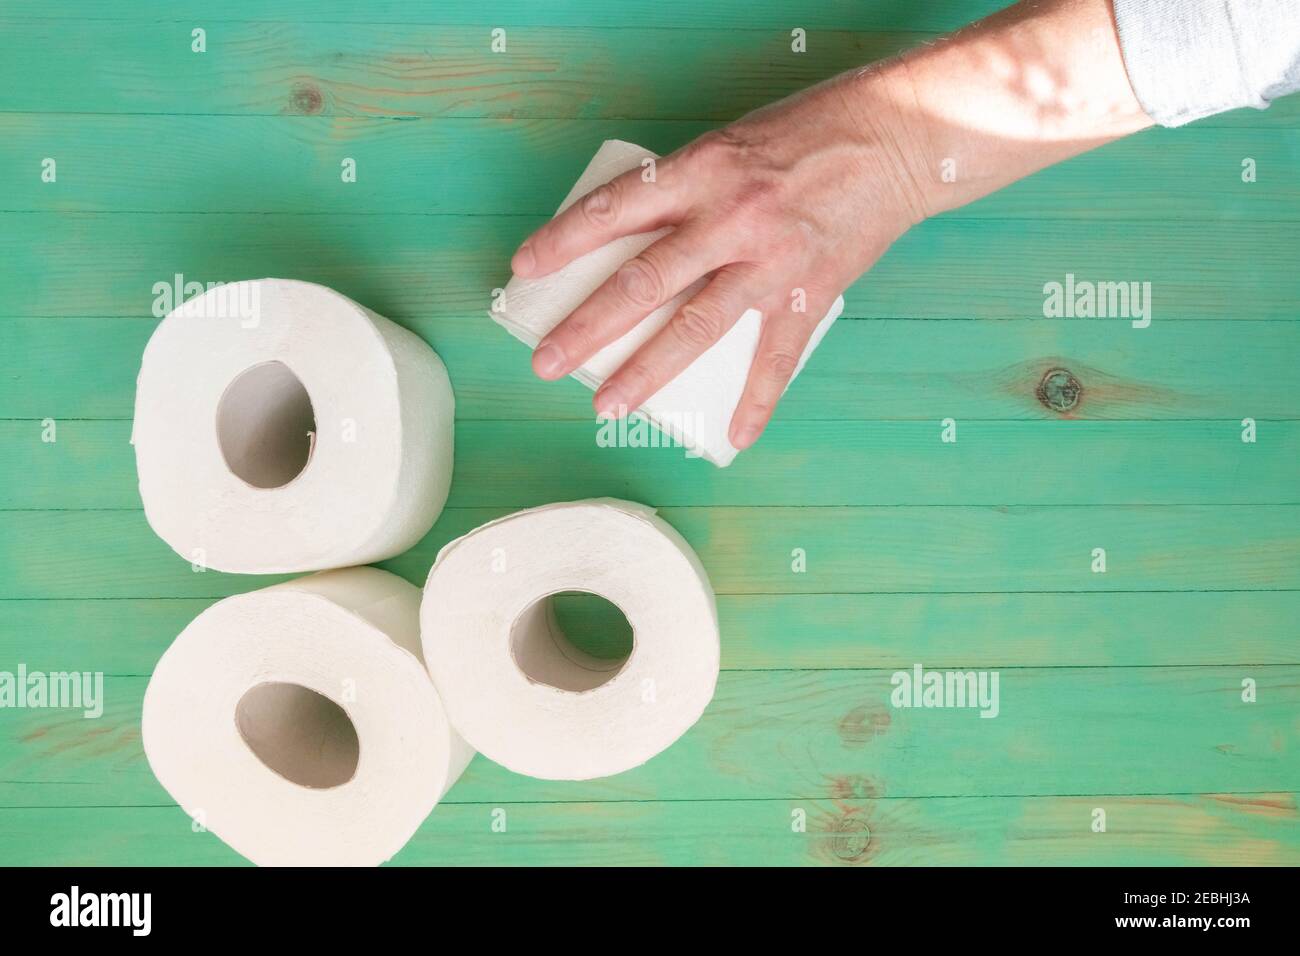 Senior hand outstretched to take toilet paper roll. People panic buying toilet paper rolls for coronavirus outbreak shortage. Stock Photo